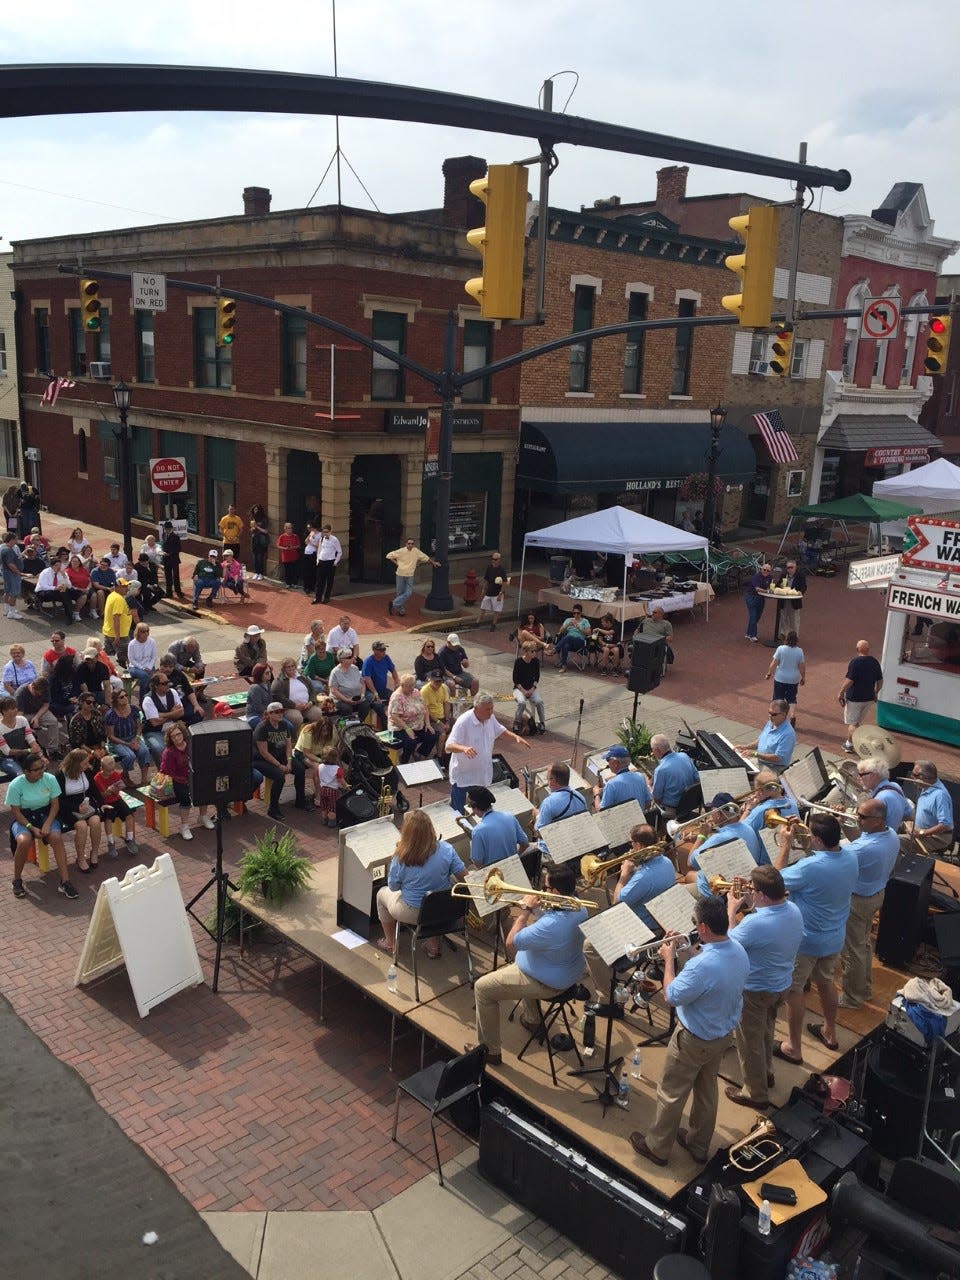 The 10th annual Brick Street Art & Jazz Festival is Saturday in Minerva. The event is on Market Street N and features food, fine crafts and interactive arts activities. High school jazz bands also will be performing.